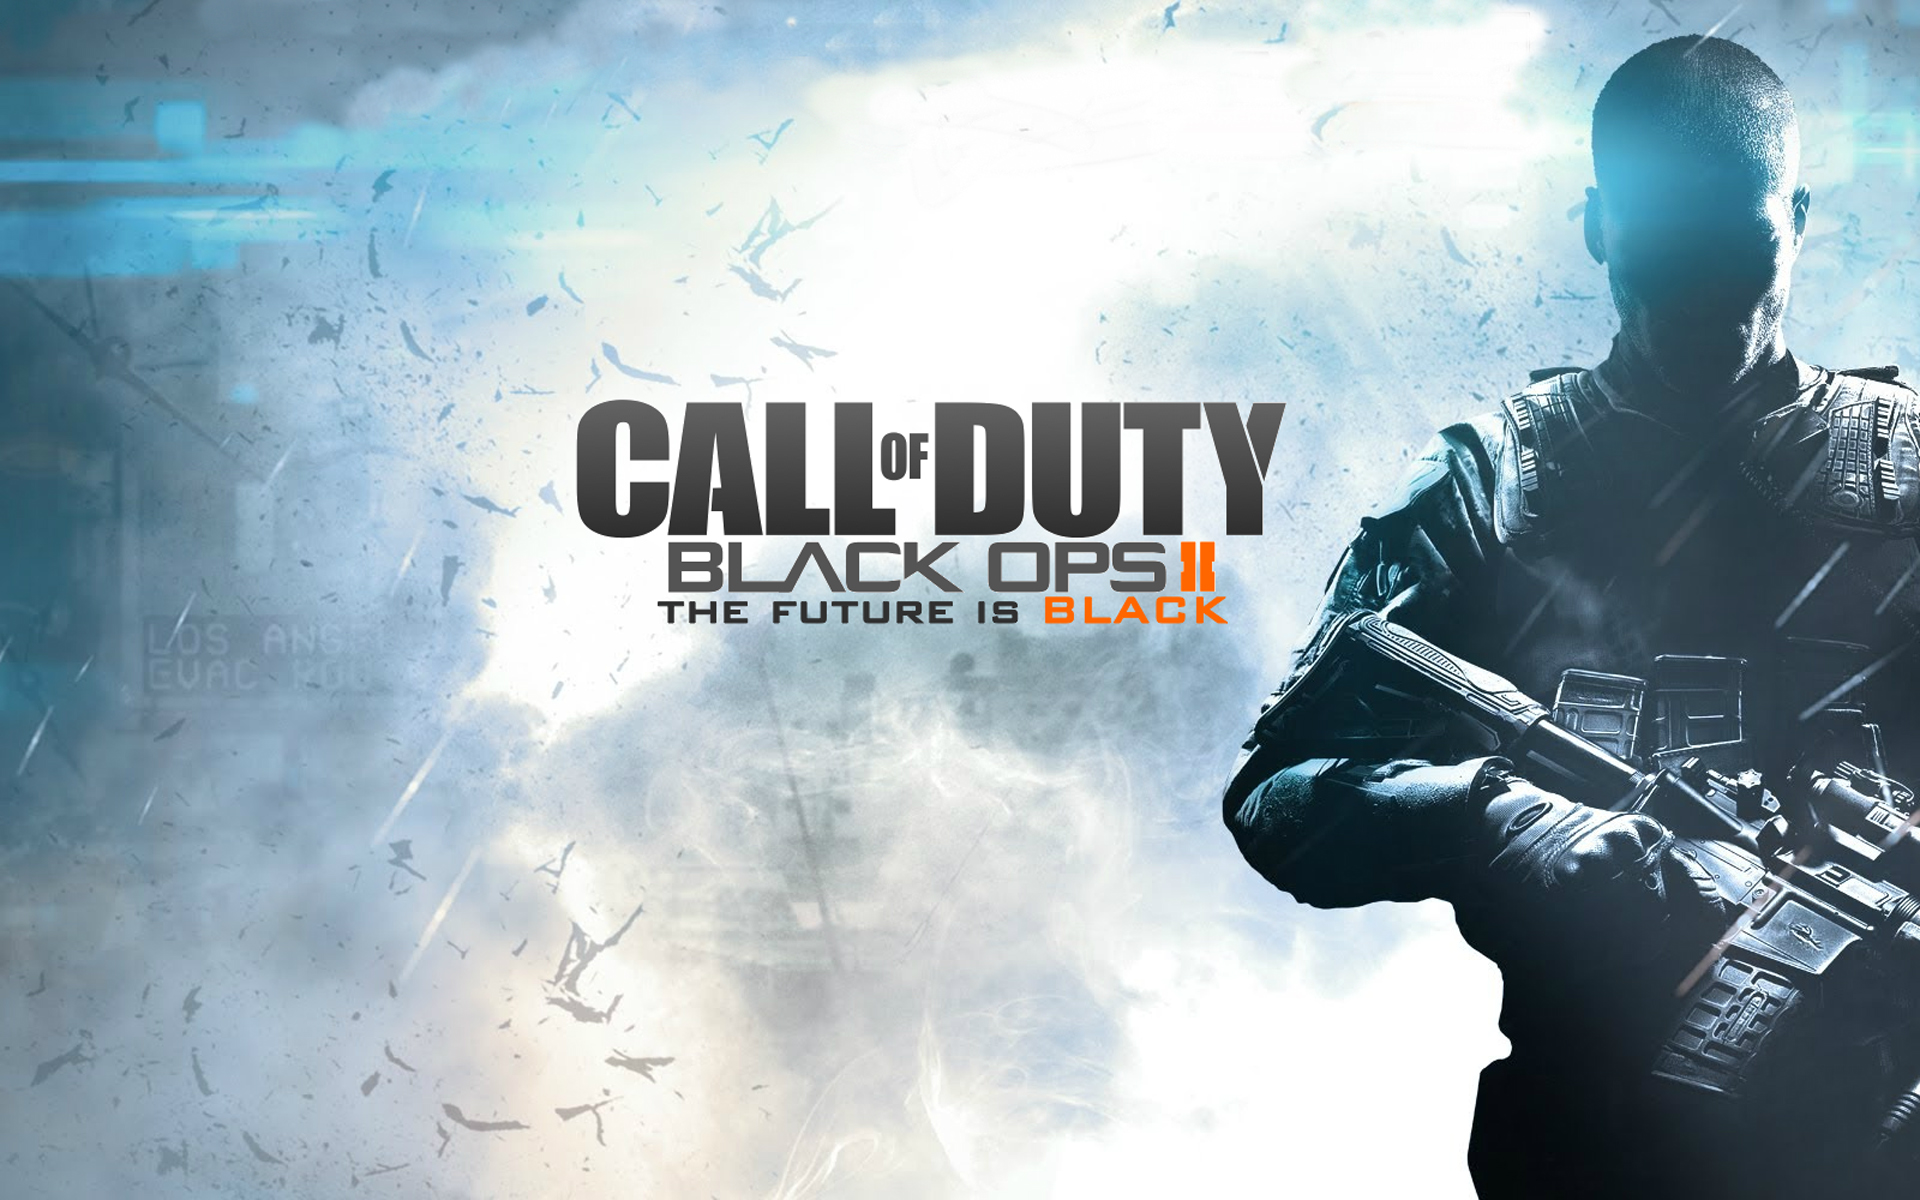 Call Of Duty Black Ops Ii HD Wallpaper And Background Image